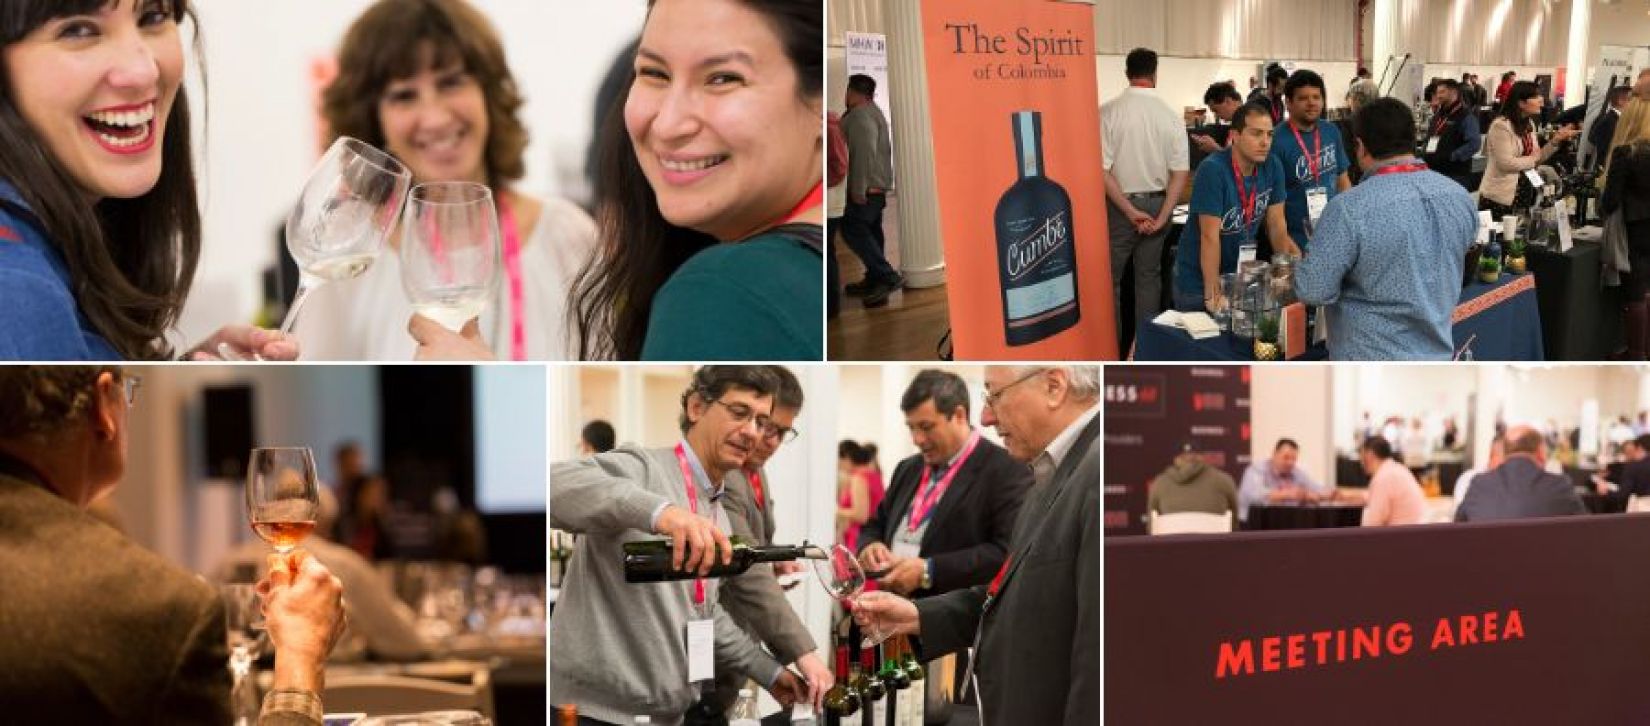 Photo for: 10 reasons why producers should exhibit at first UK Trade Tasting 